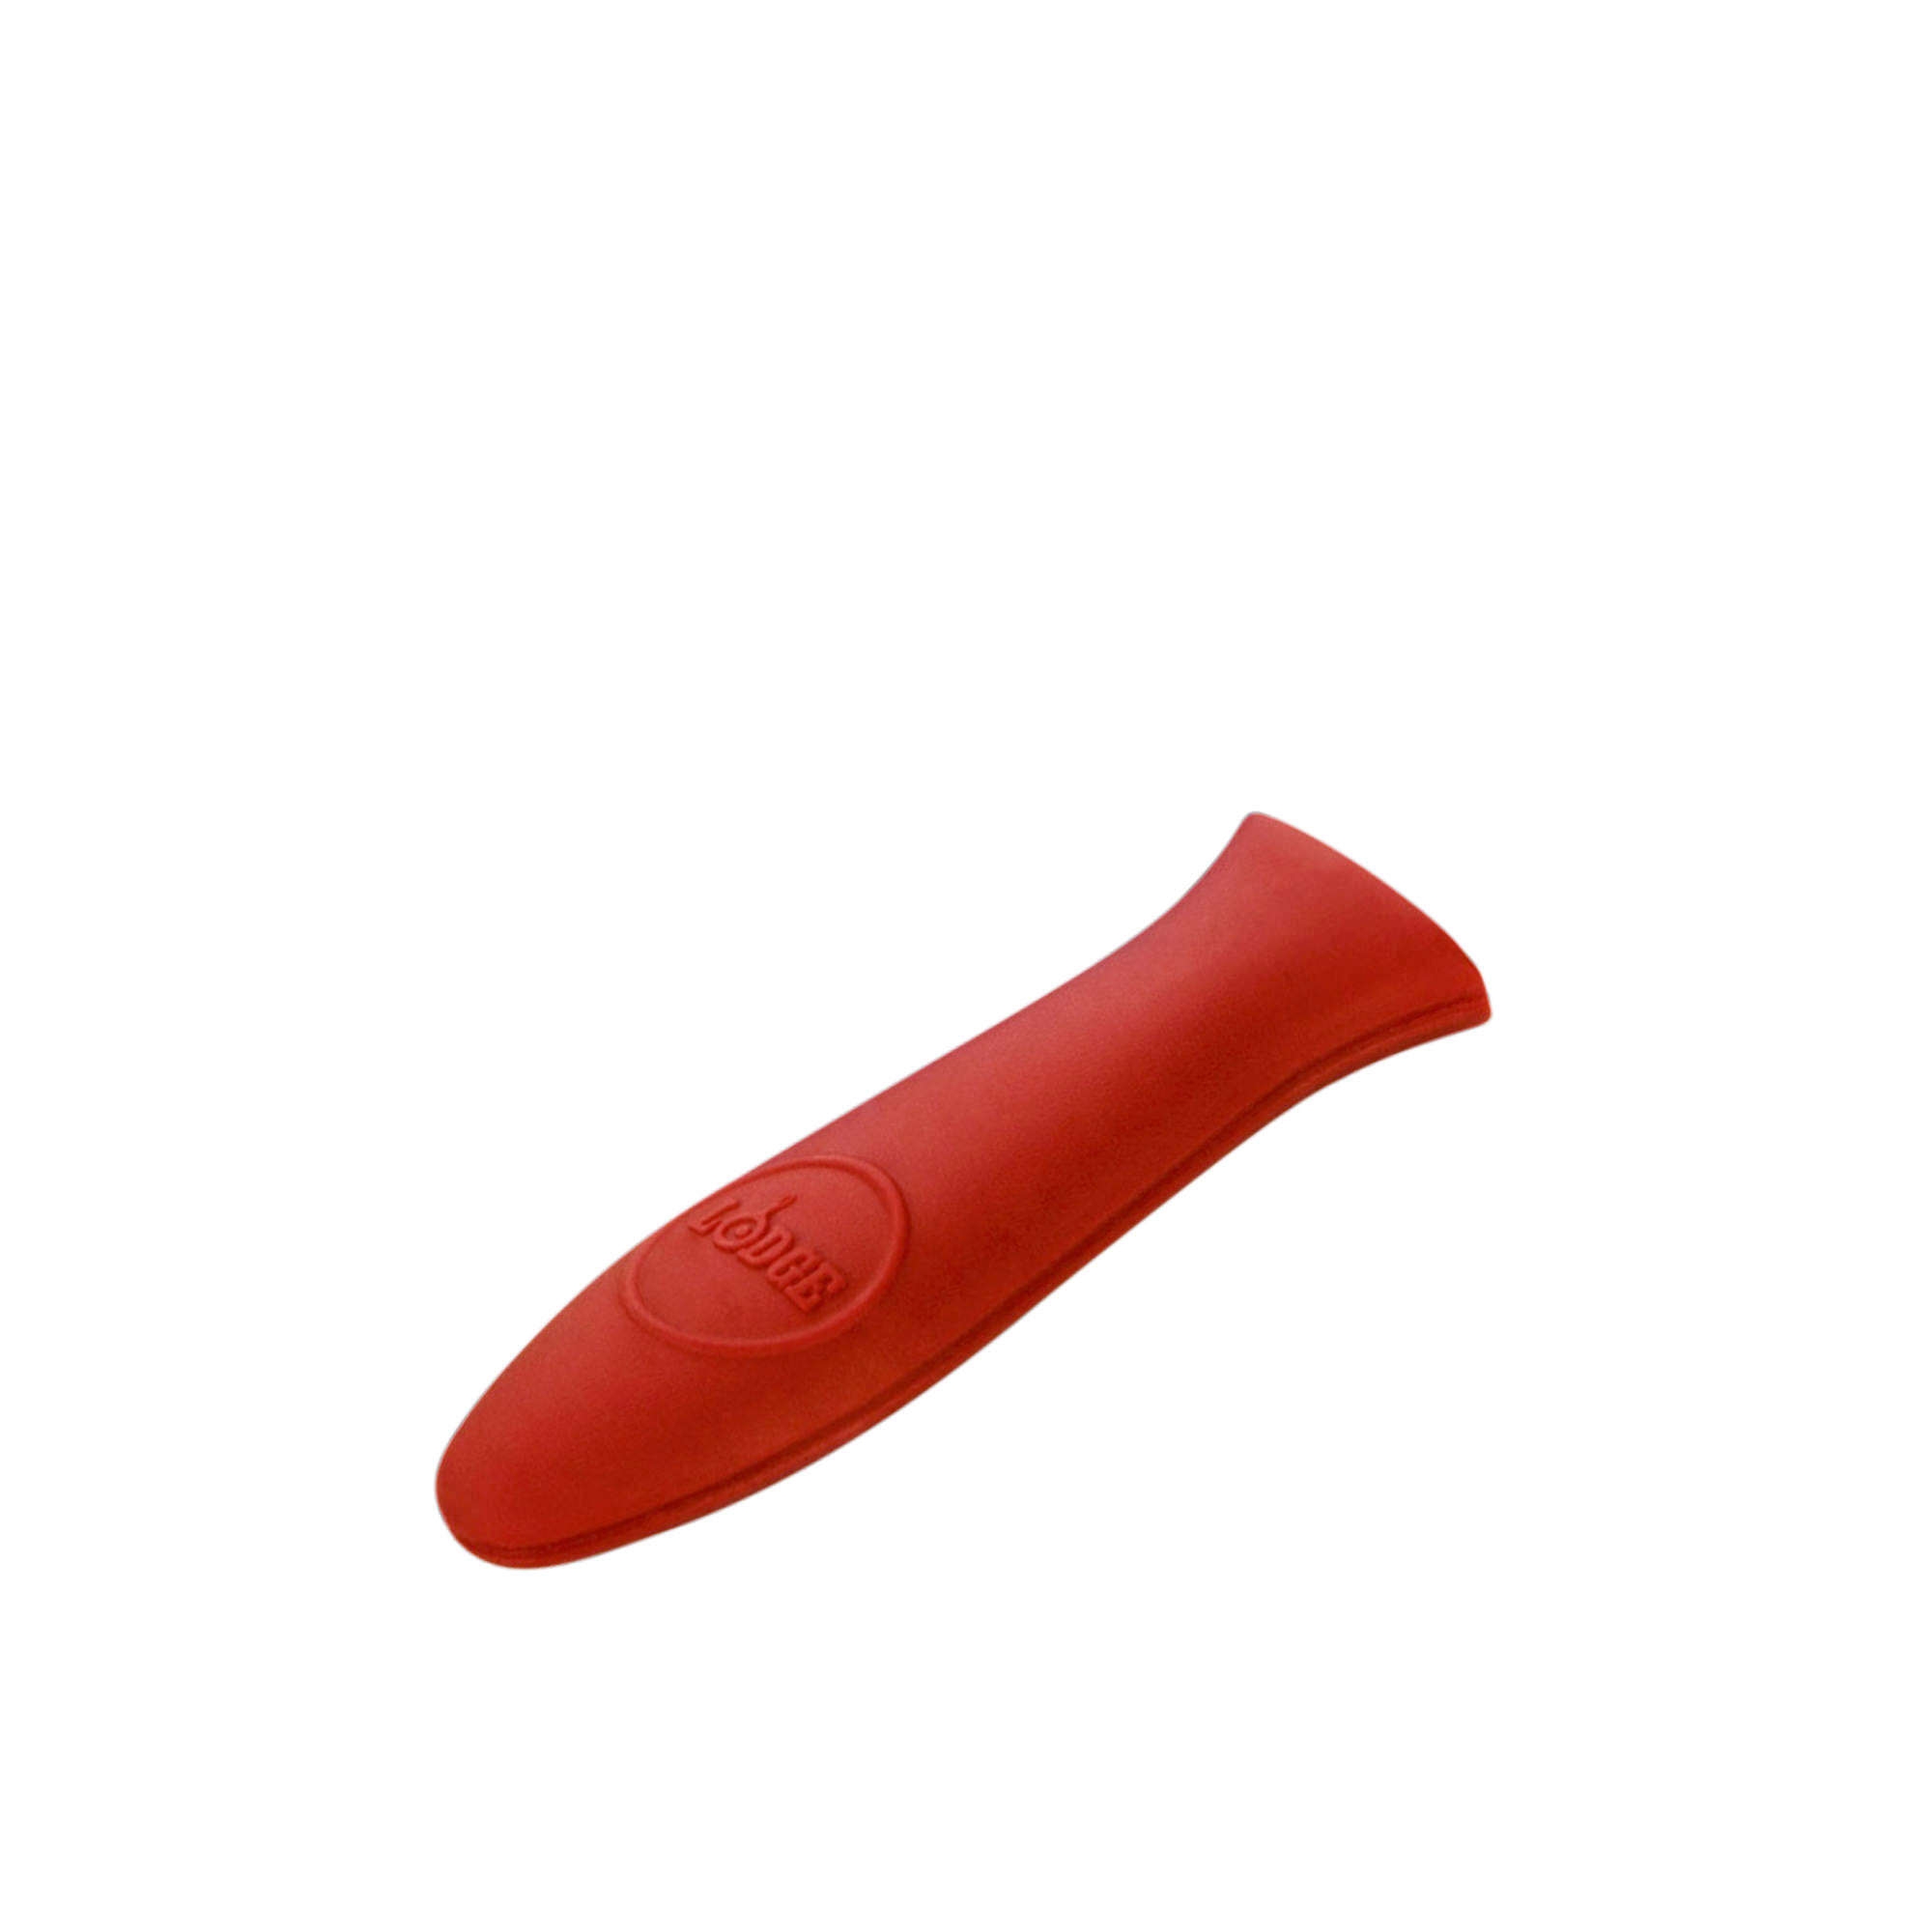 Lodge Silicone Hot Handle Holder Red Image 2